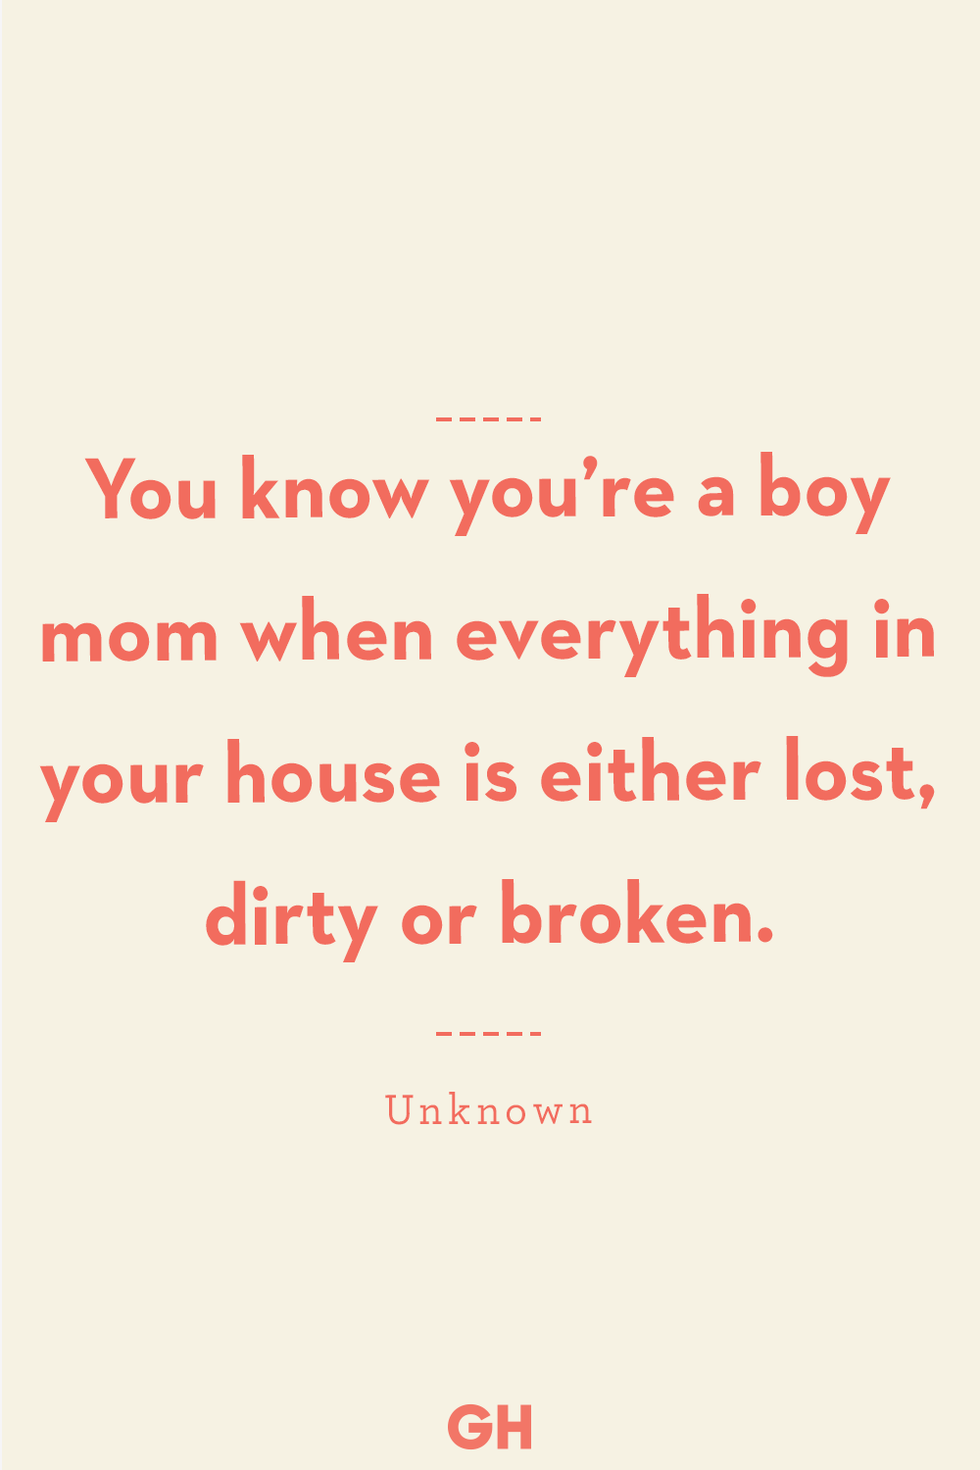 you know you’re a boy mom when everything in your house is either lost, dirty or broken